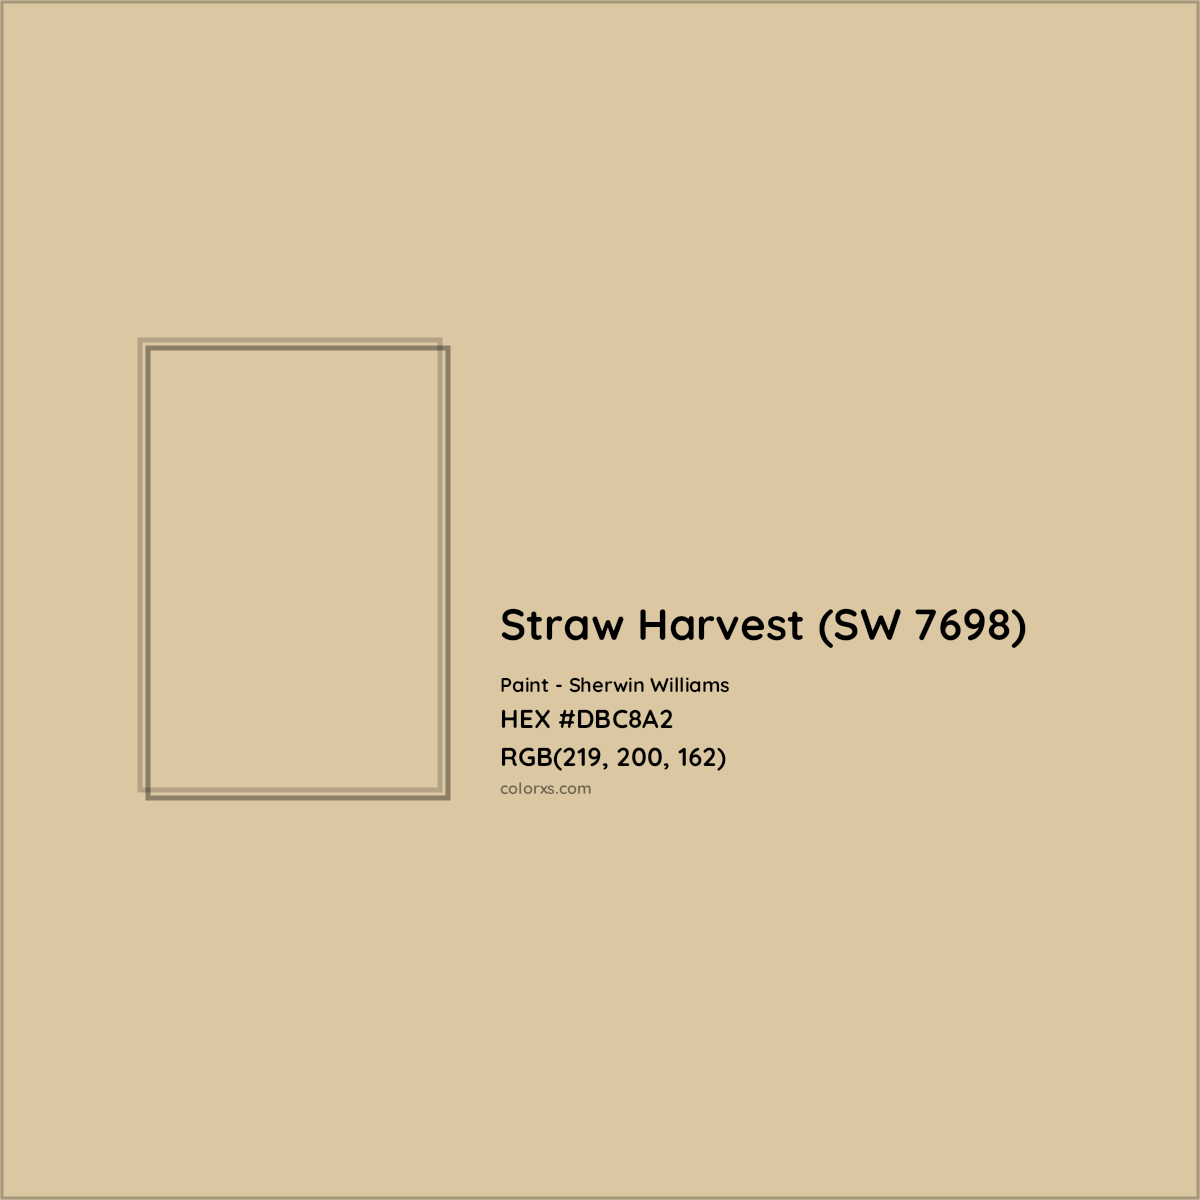 HEX #DBC8A2 Straw Harvest (SW 7698) Paint Sherwin Williams - Color Code